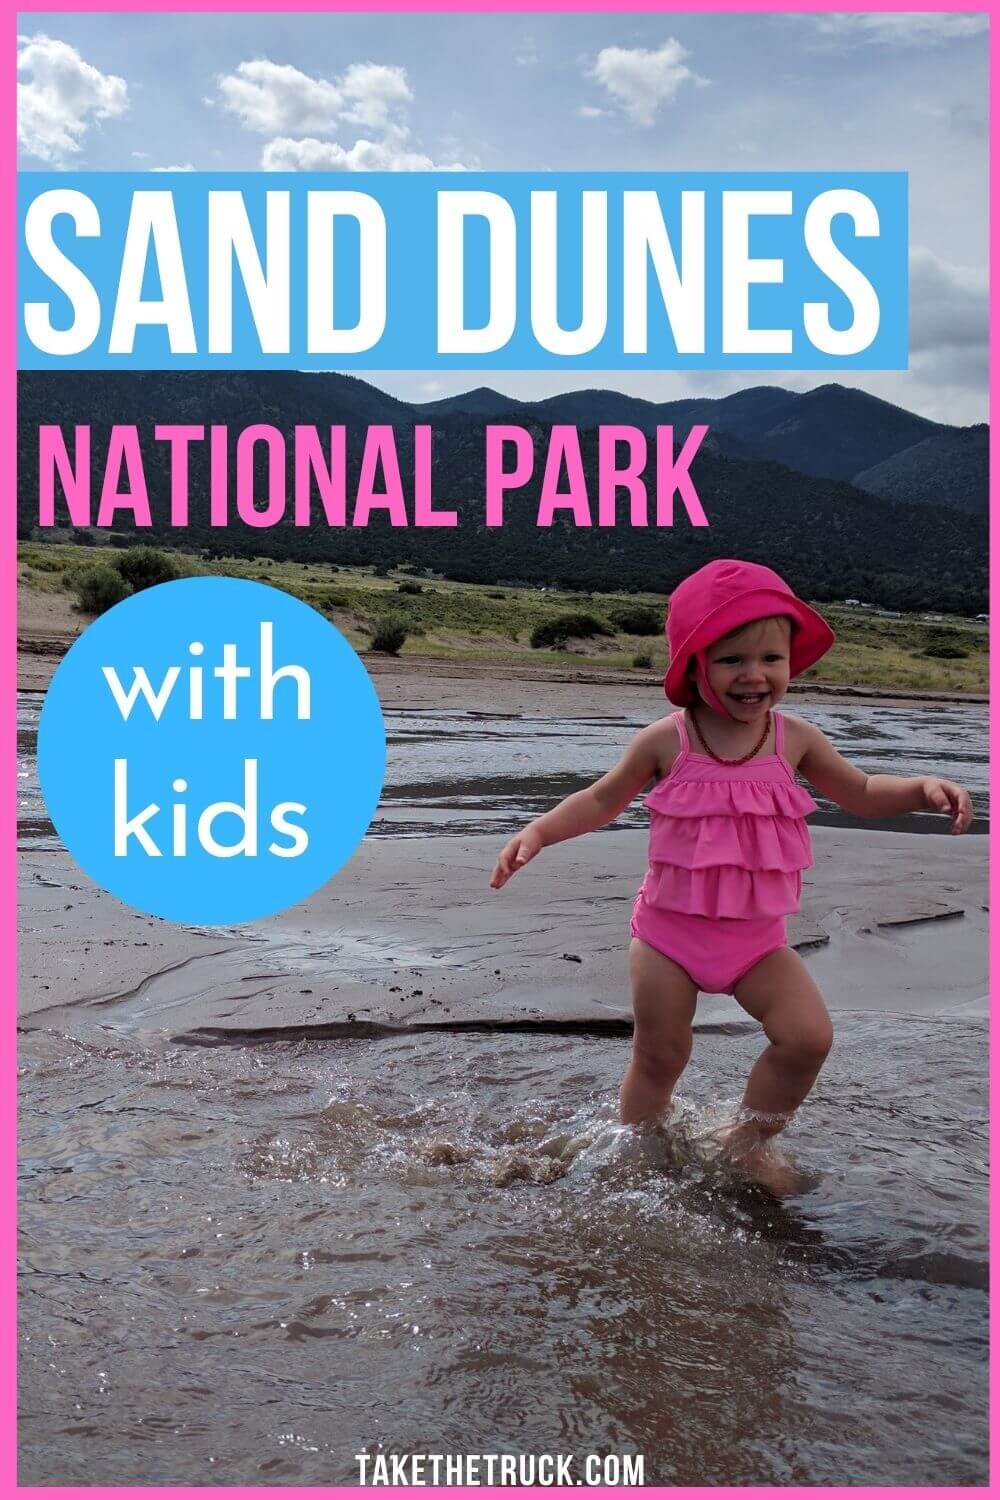 Visiting Great Sand Dunes National Park with kids is a relaxing family vacation in Colorado! Check out this post to see why Sand Dunes National Park should be put on your bucket list with kids.